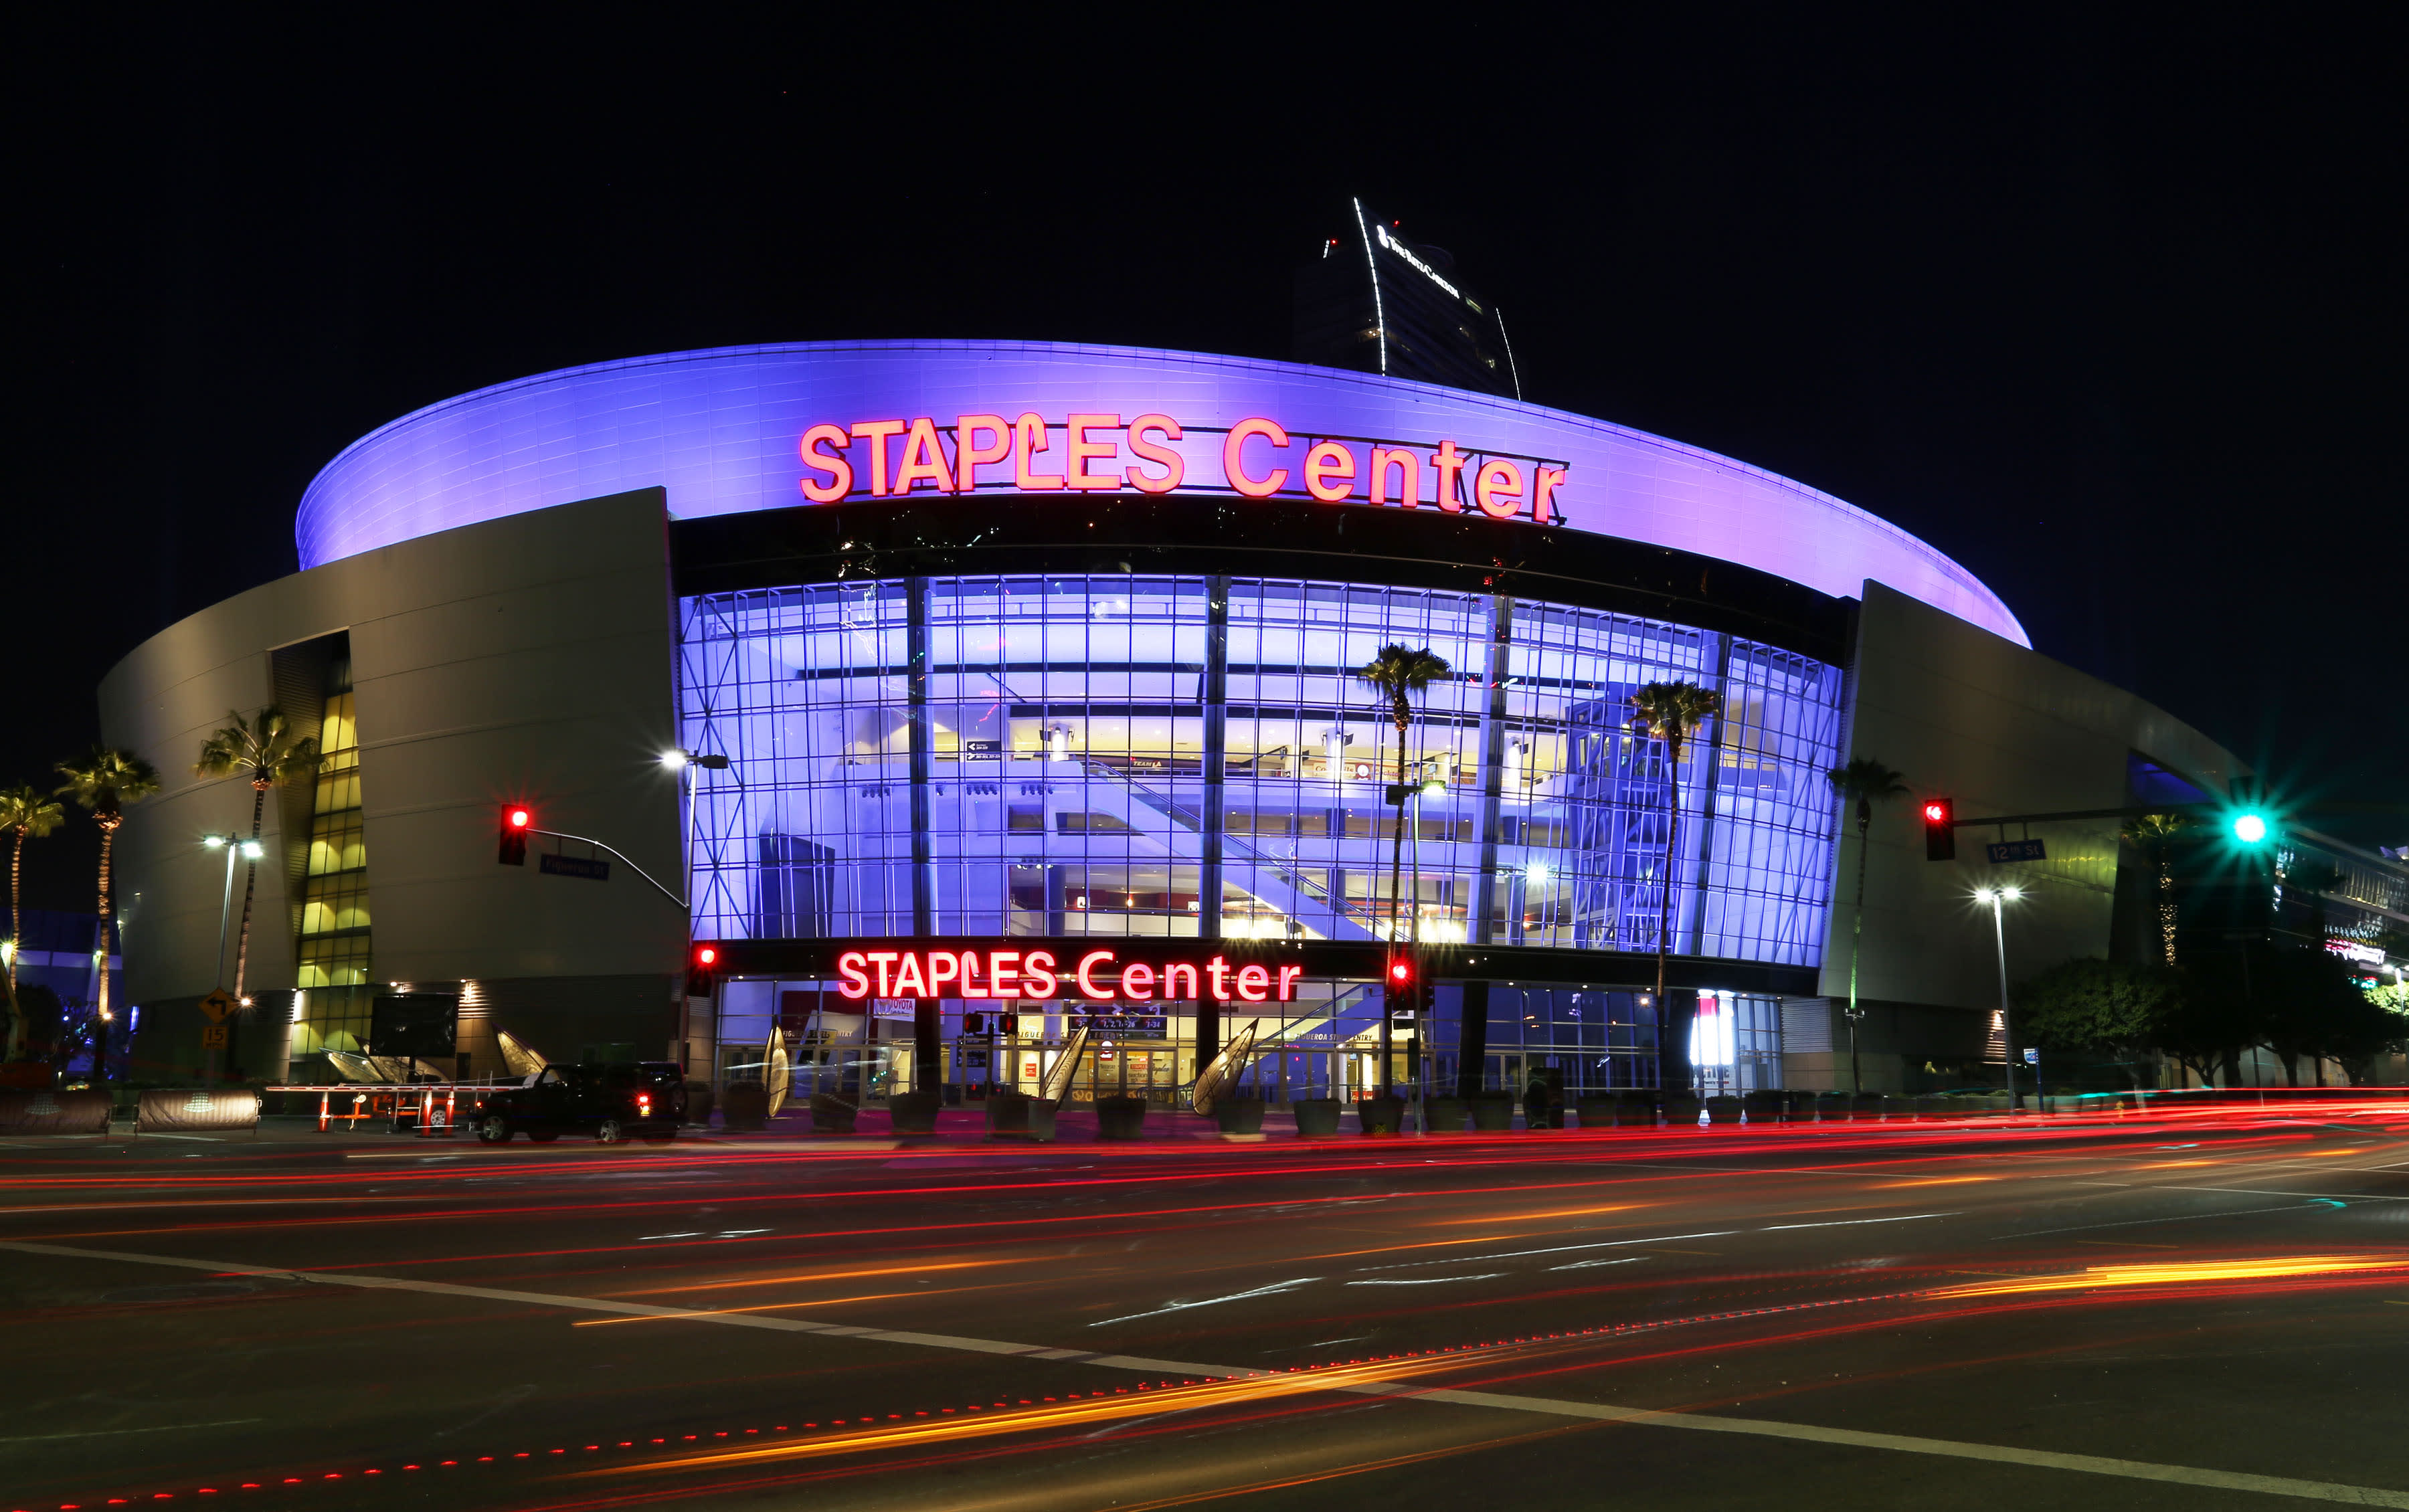 Crypto.com buys naming rights to Lakers' Staples Center in a $700